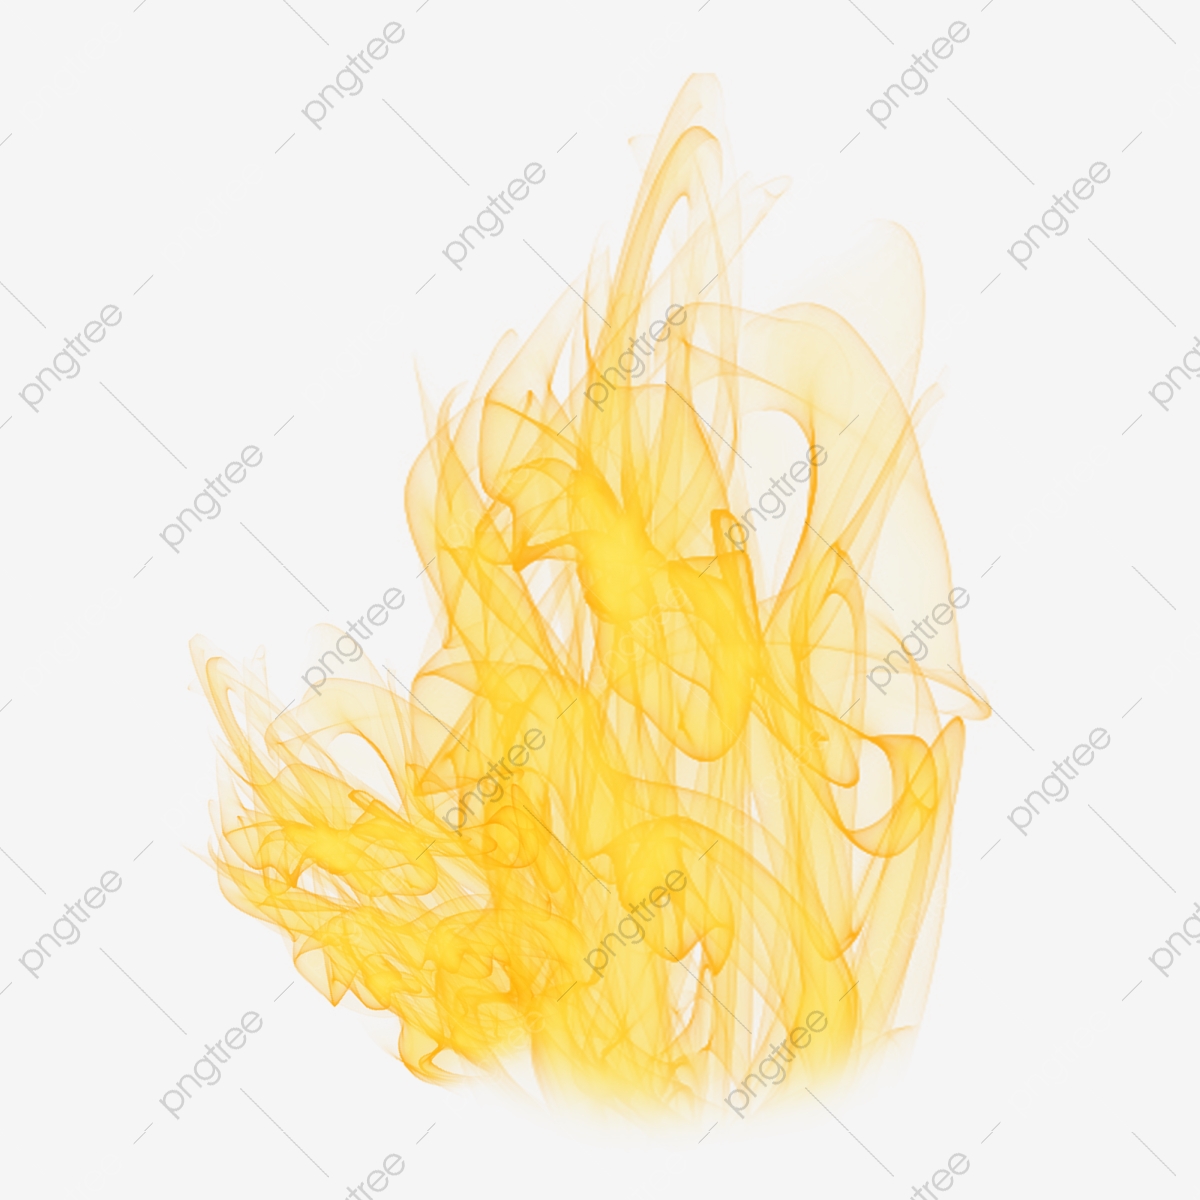 Flames clipart gold. Golden yellow flame png